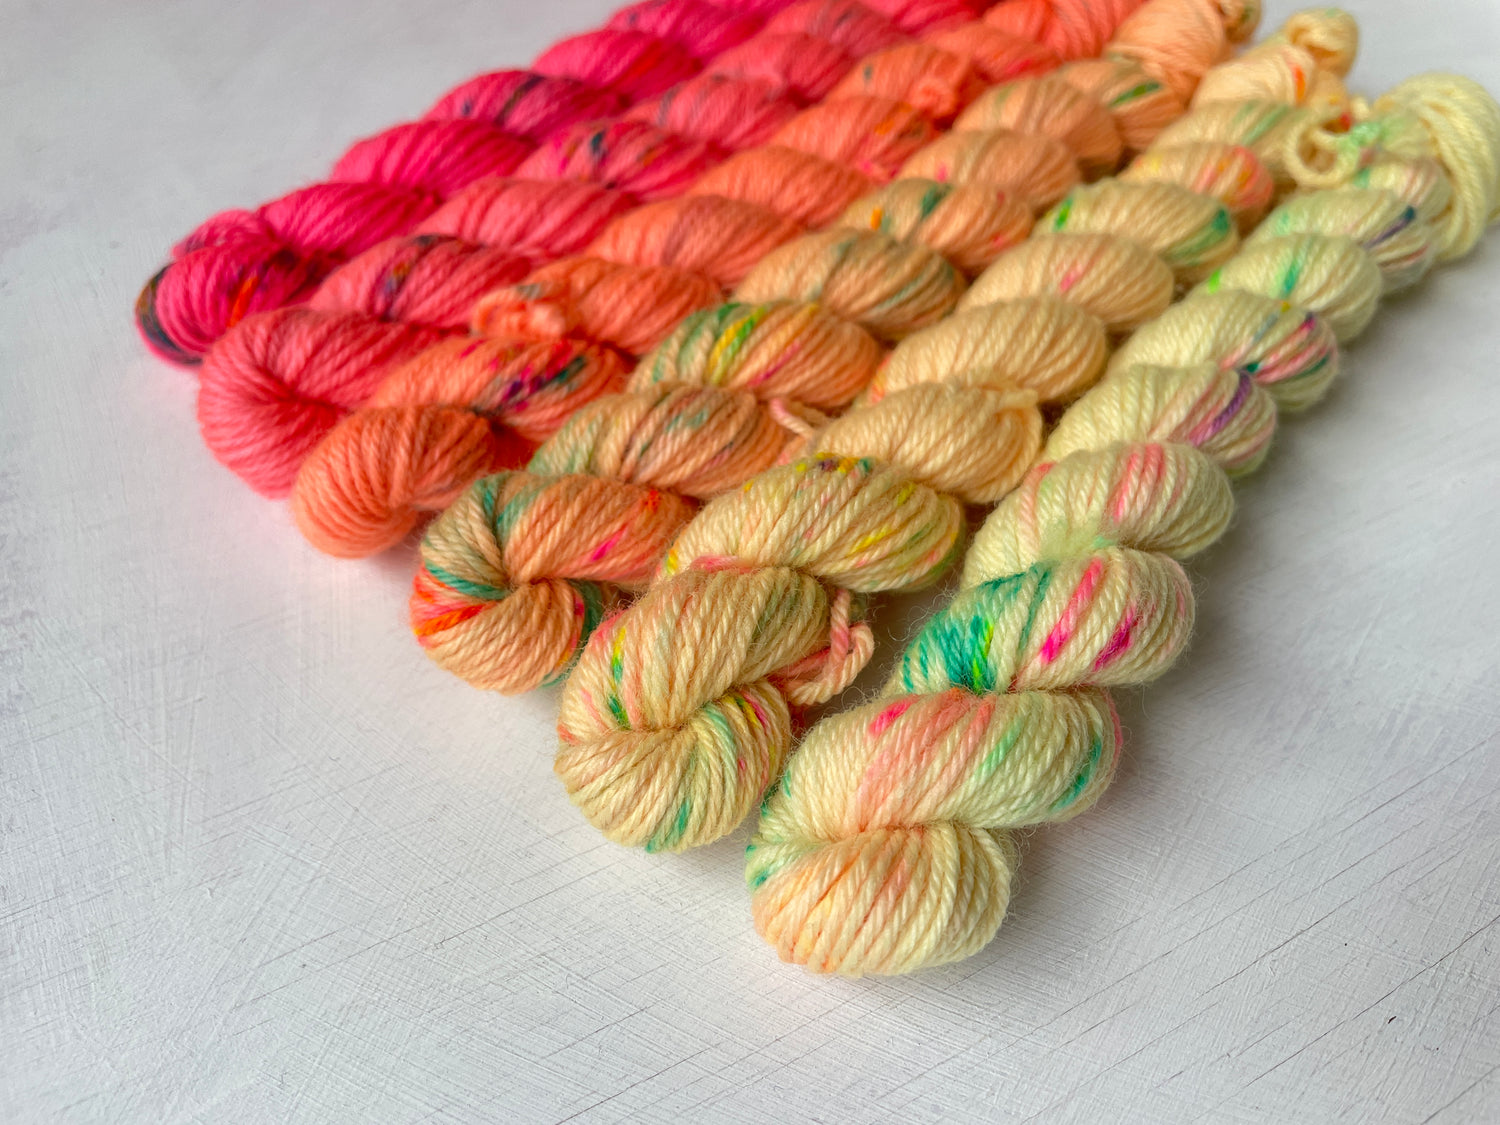 Advent Calendar and Advent Minis collection from the hand dyed yarn expert, The Wool Kitchen